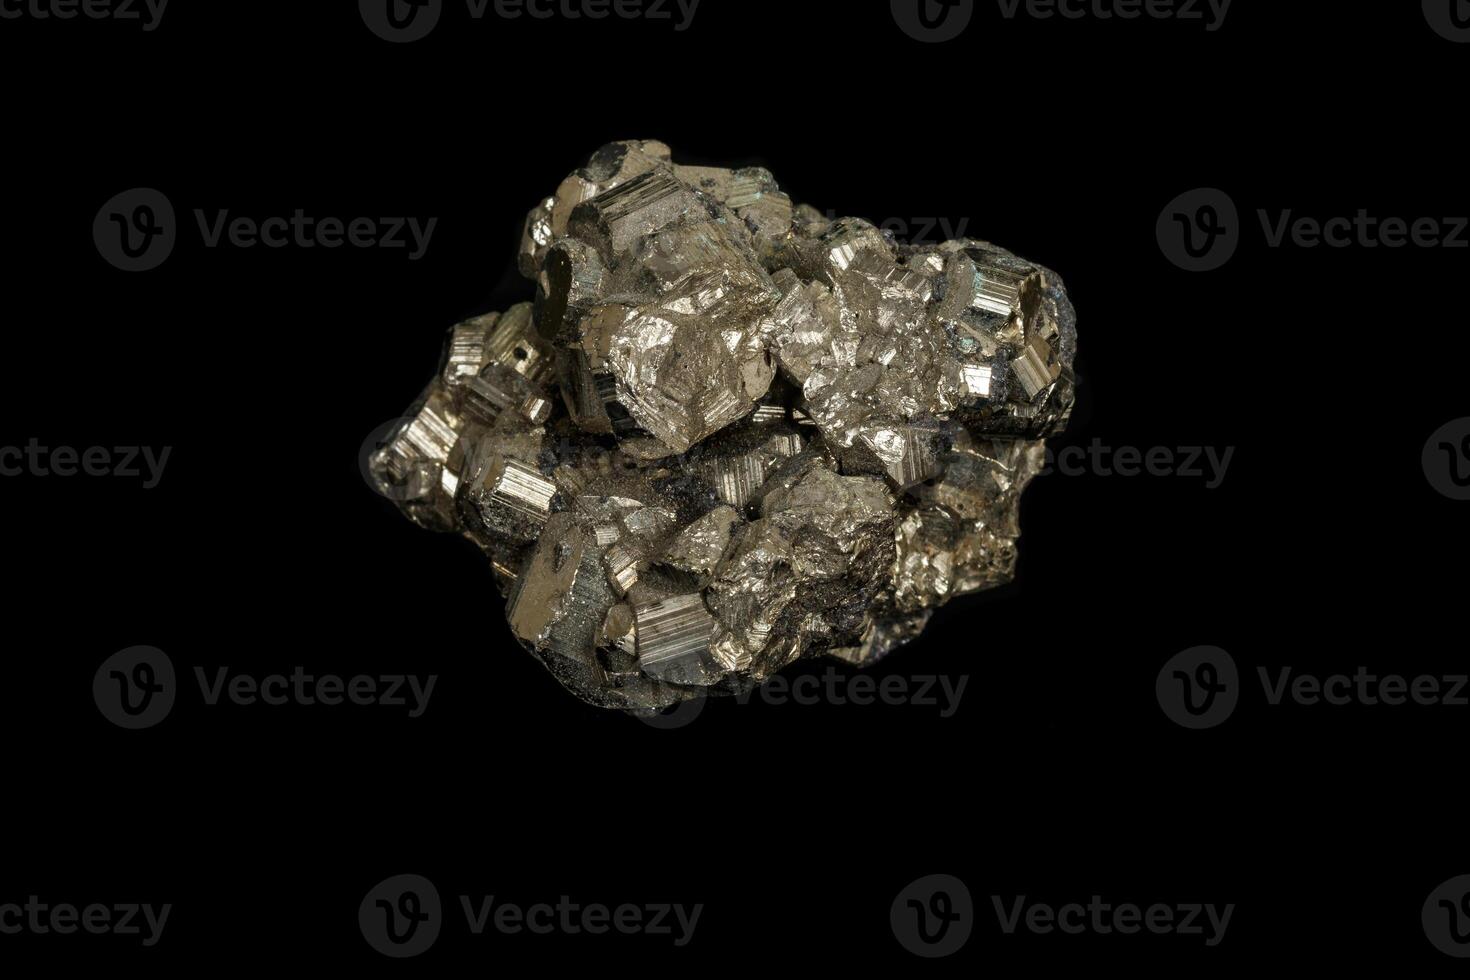 Macro mineral stone Pyrite on a black background photo